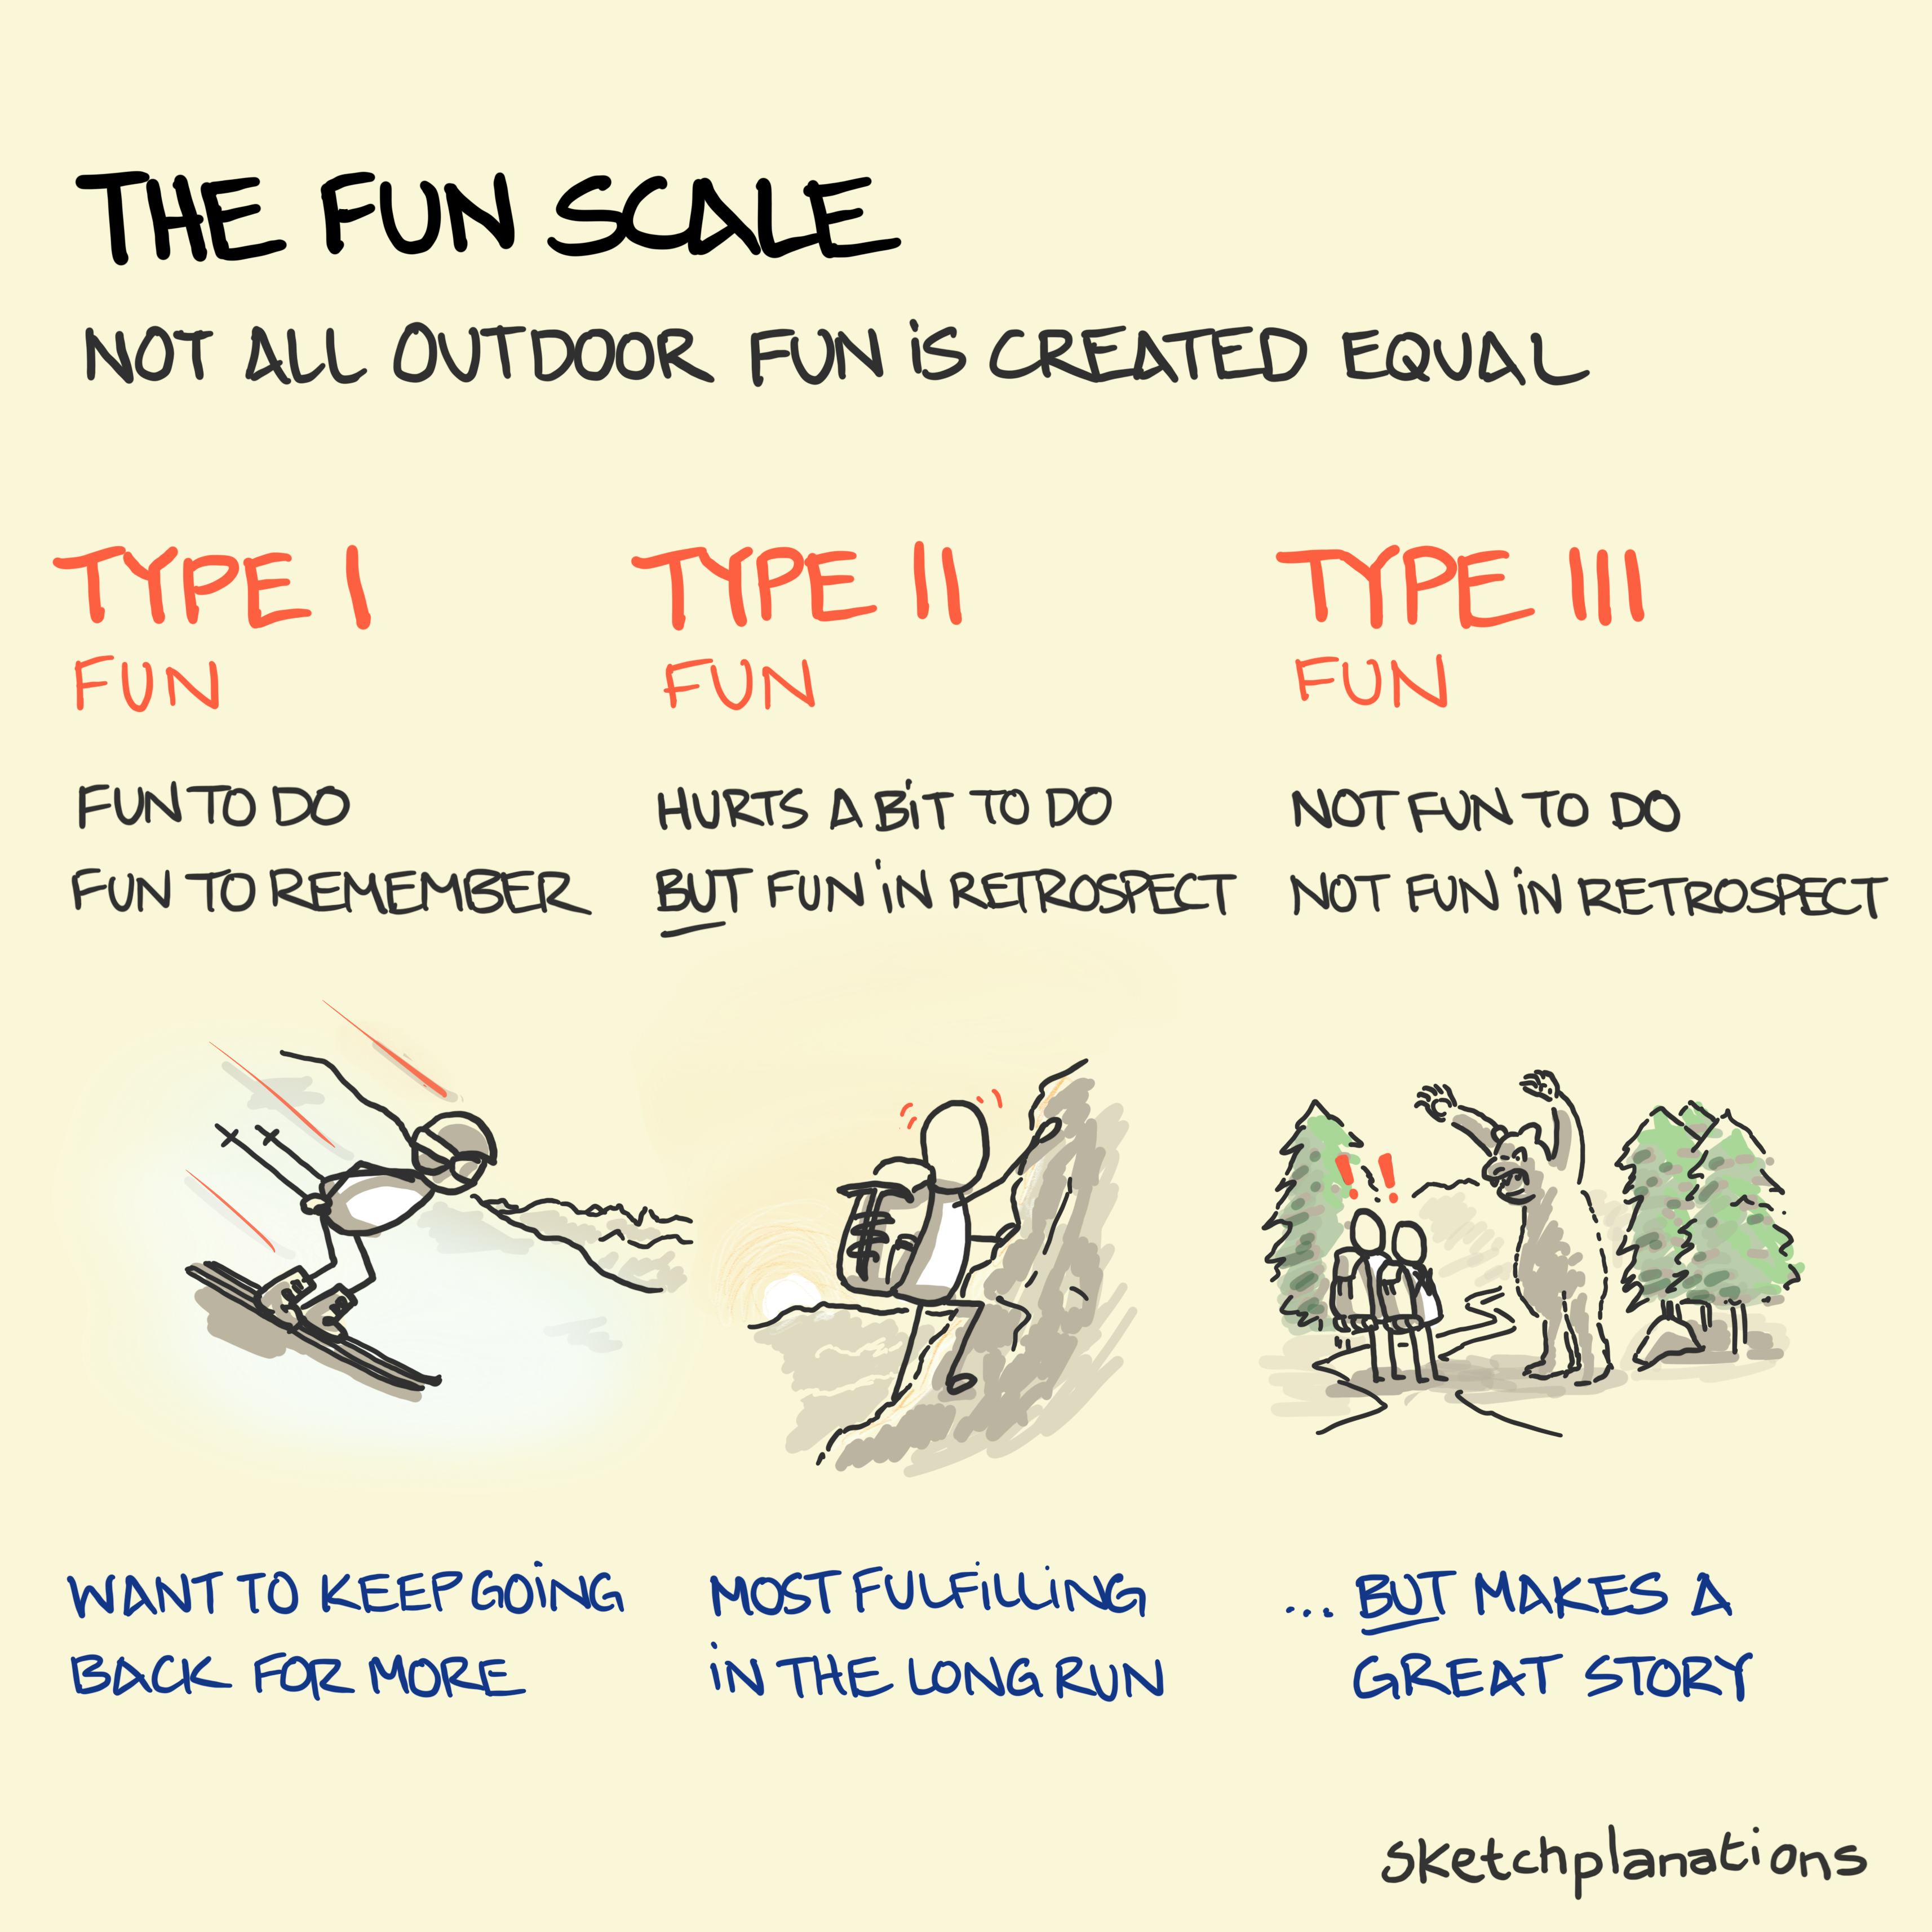 The Fun scale for outdoor fun: illustrating Type 1 fun as skiing, Type 2 fun as mountaineering and Type 3 fun as surviving a bear encounter (the best story)